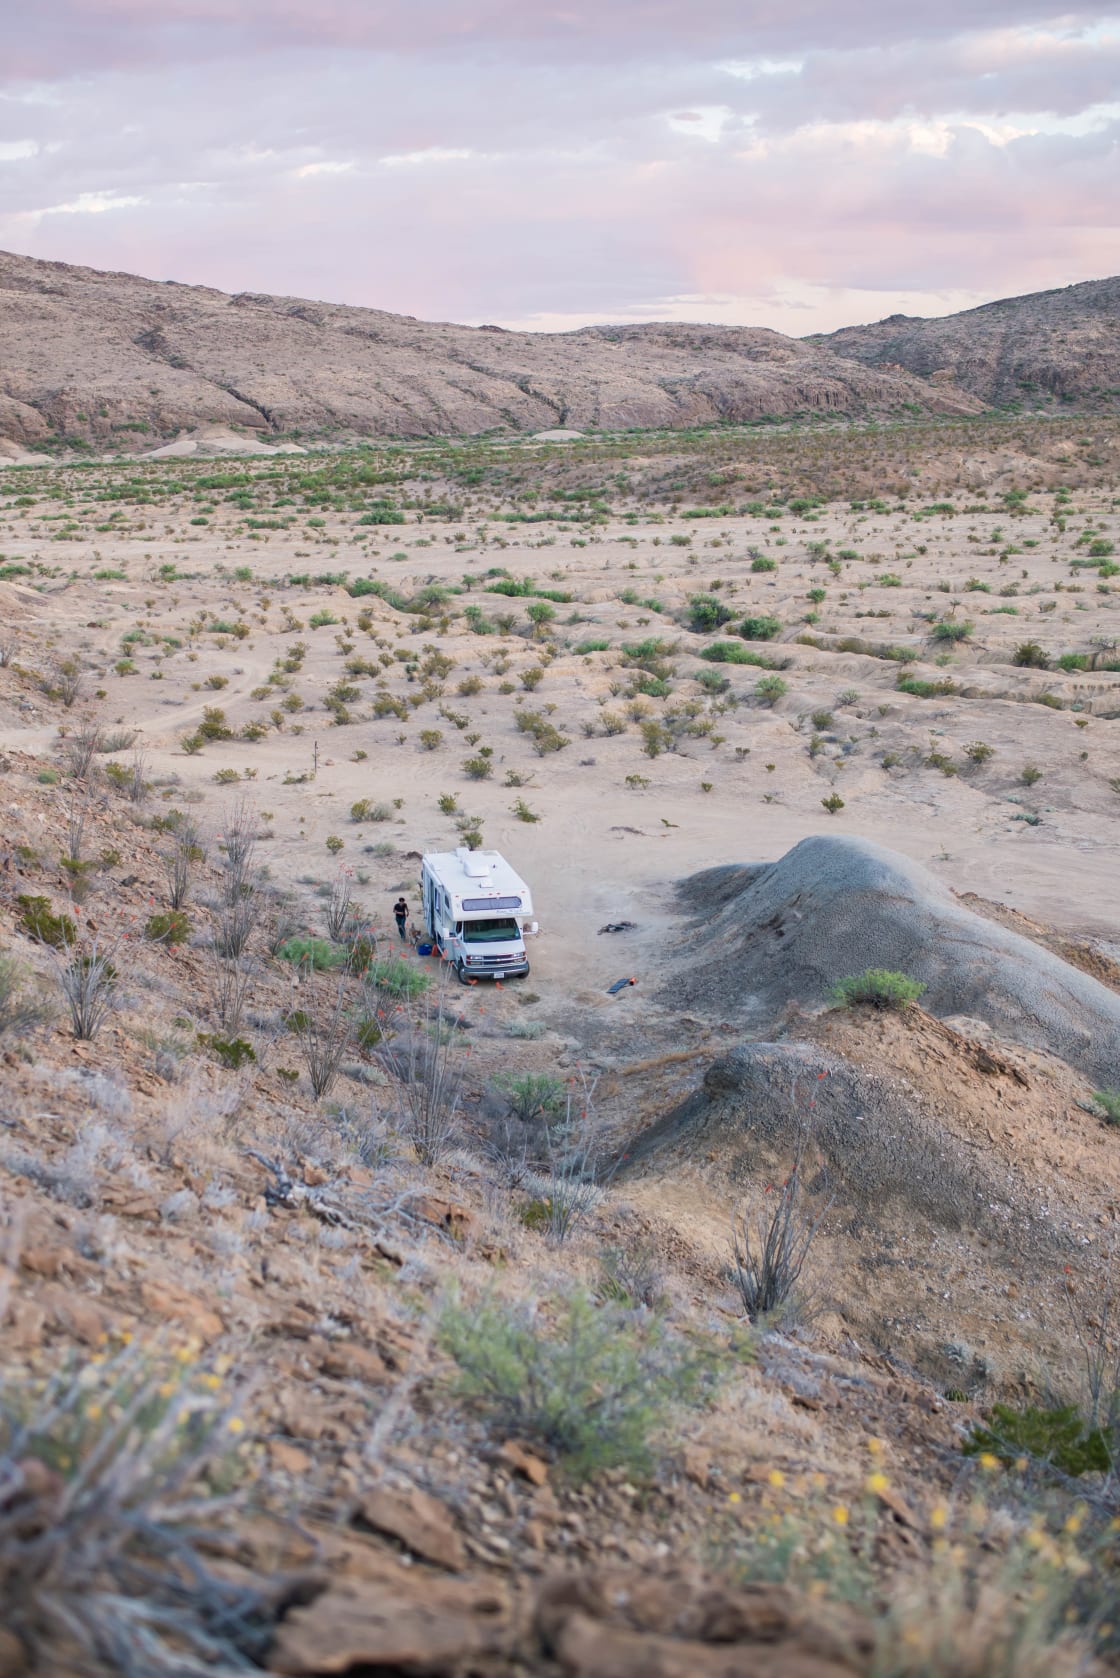 We tucked our rv in this perfect secluded campsite